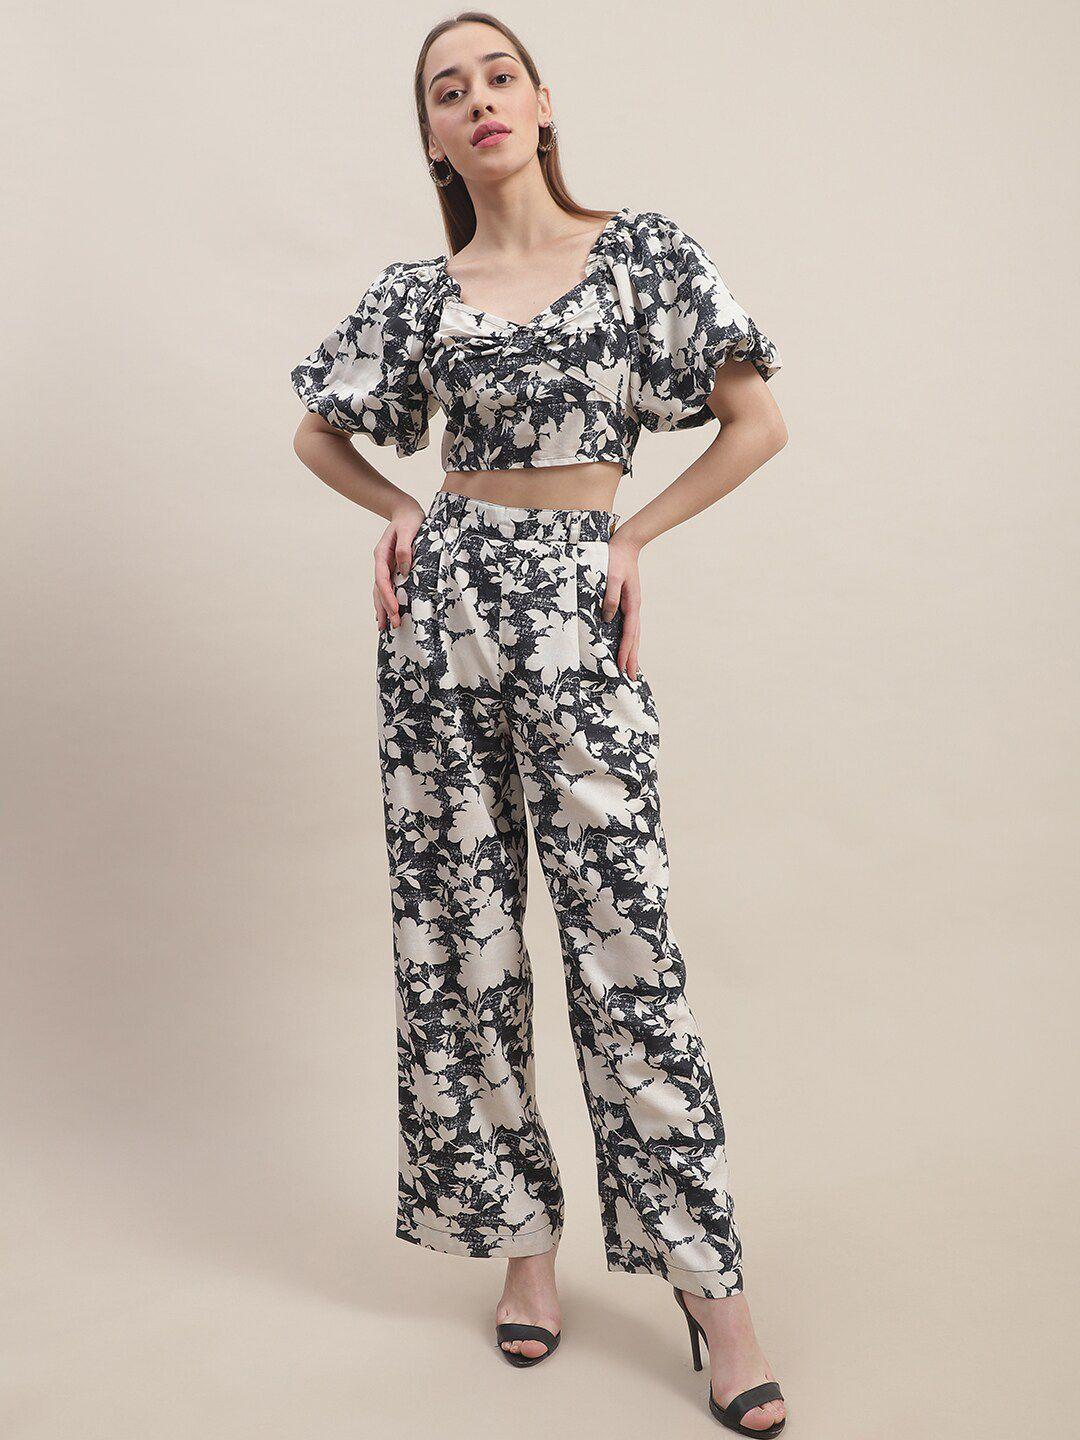 blanc9 white printed crop top & trousers